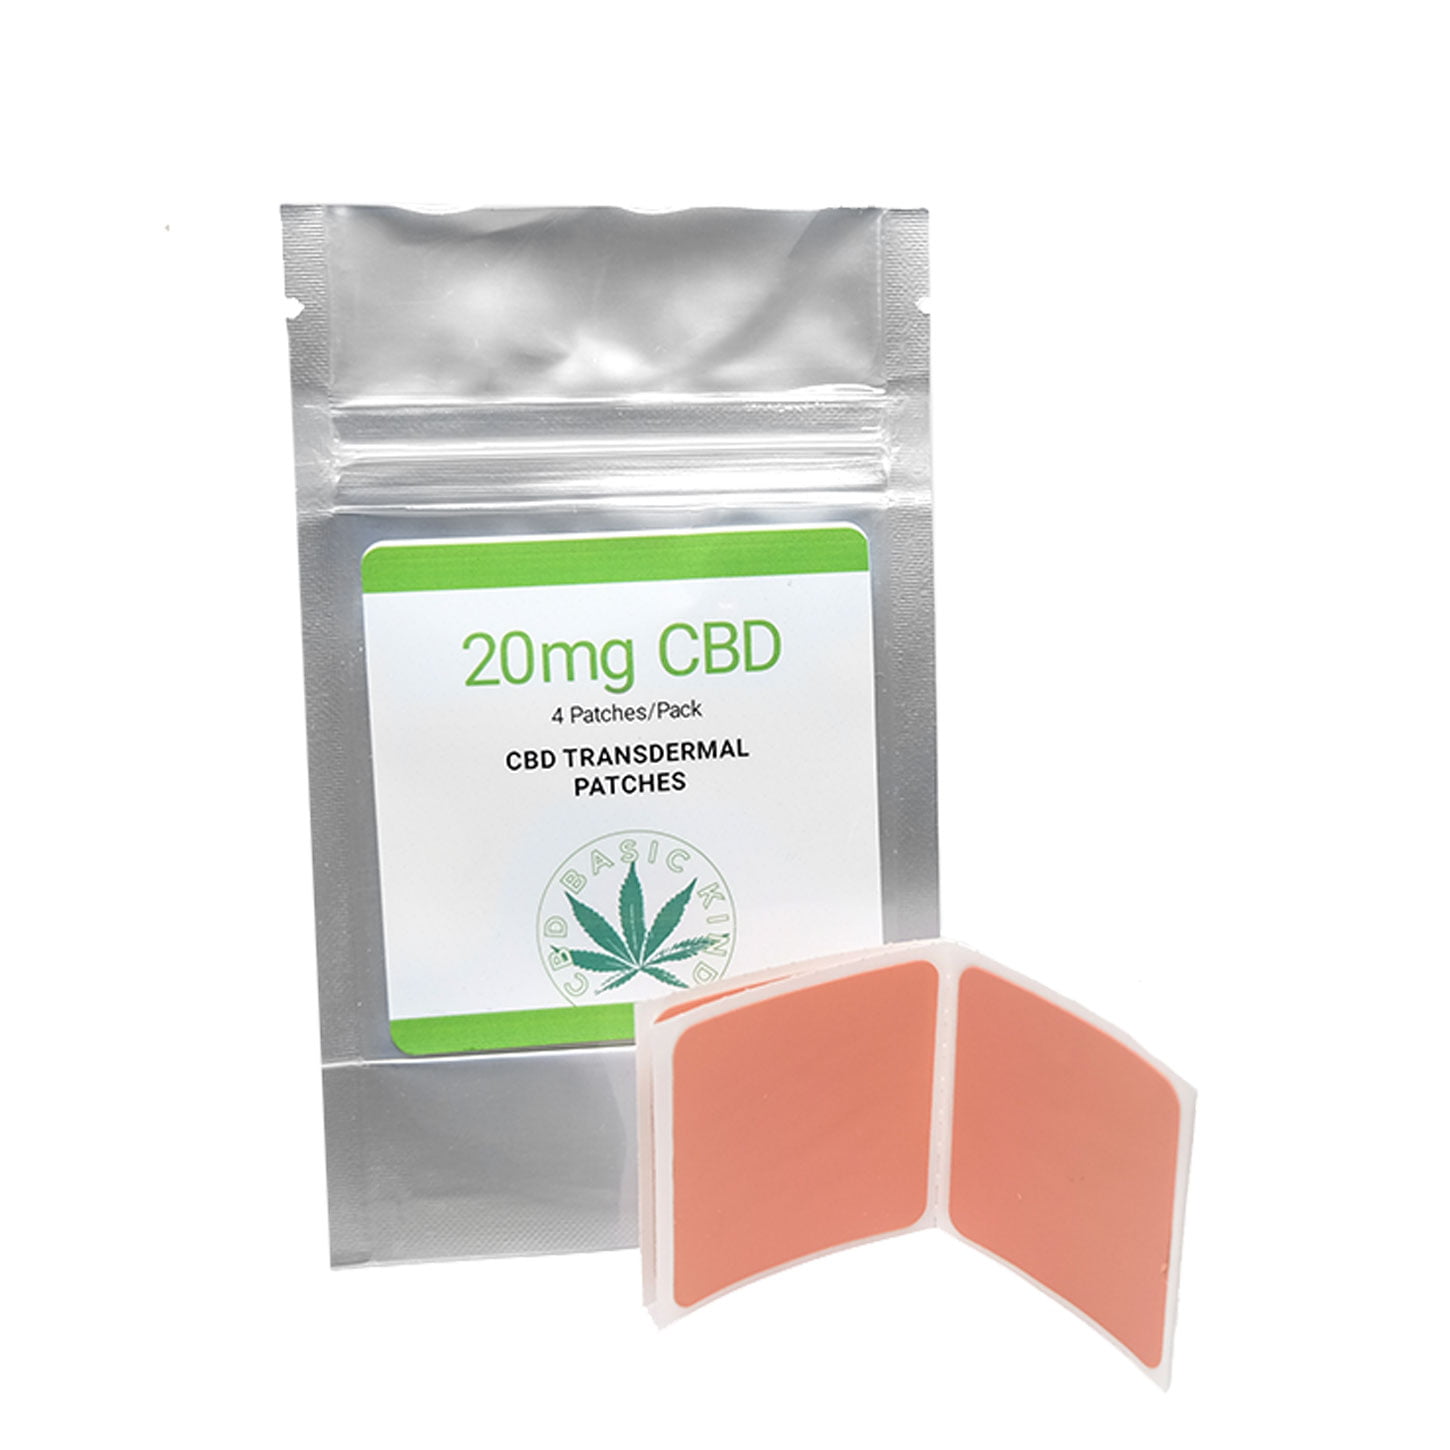 CBD transdermal patch for pain available at a nearby and affordable dispensary.